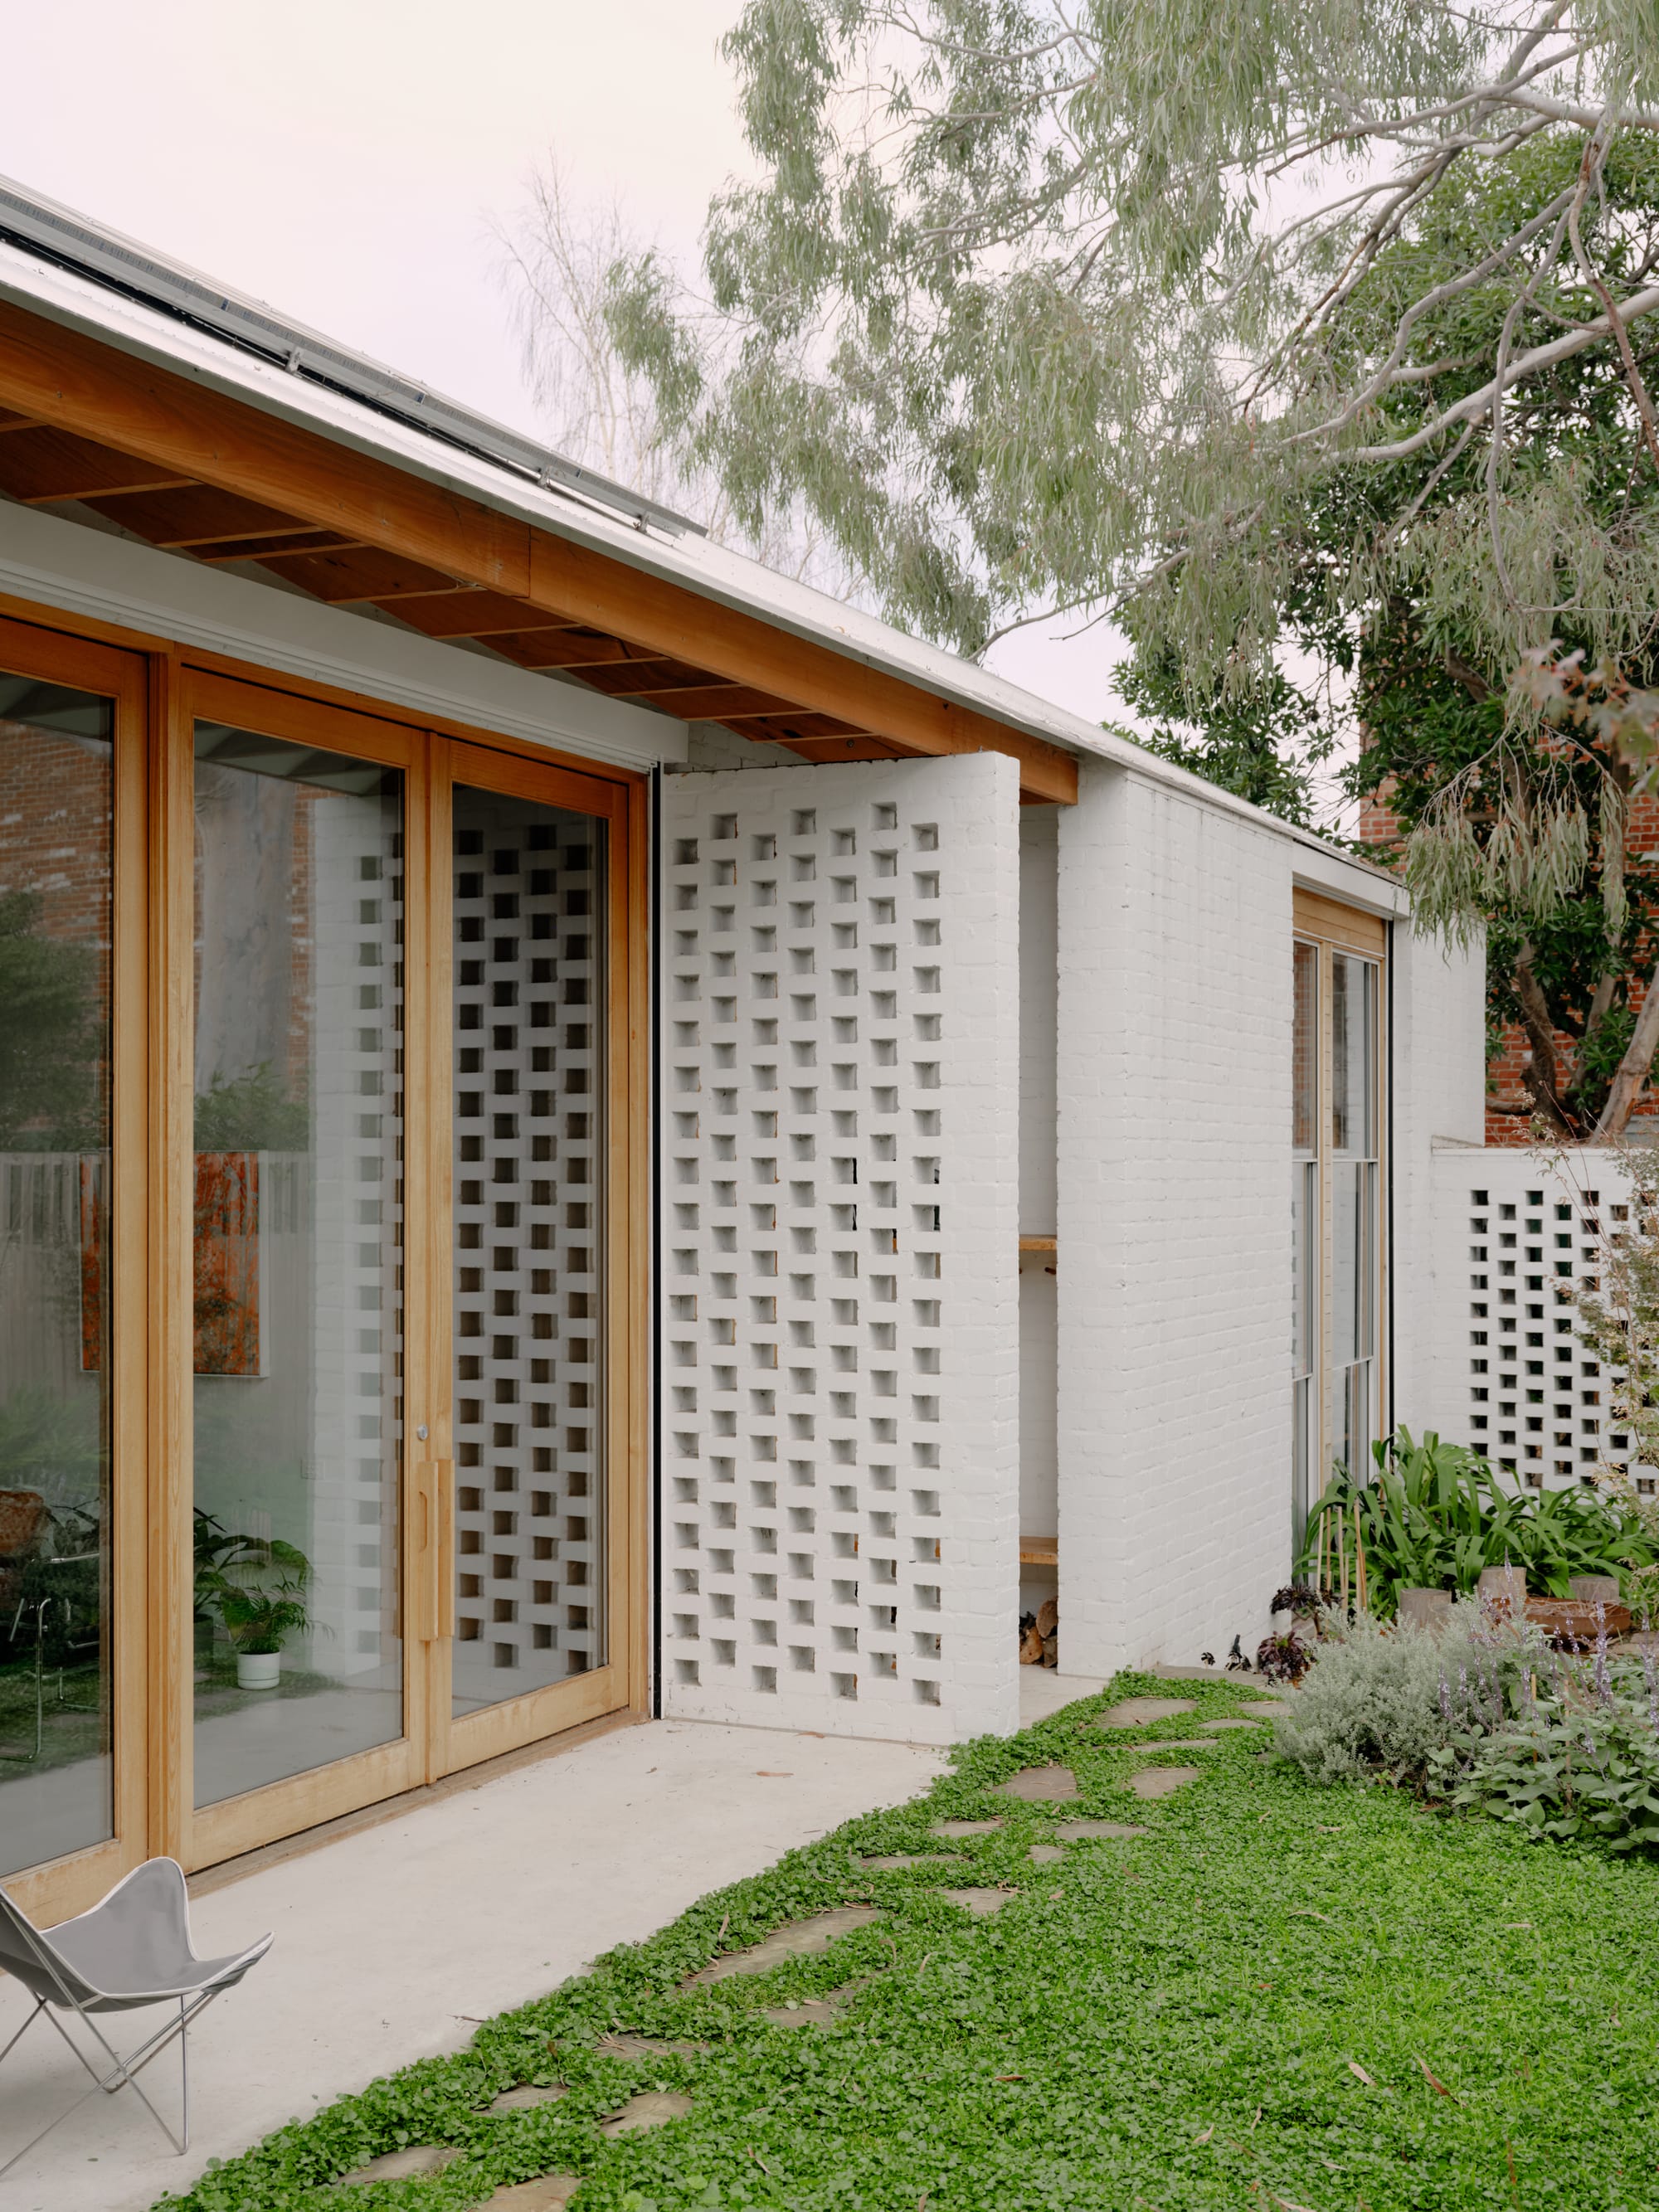 Corymbia by Karen Abernethy Architects. Photography by Tom Ross. Externa wall of residential home built from white brick. Timber framed glass doors and brick breezeblocks. Green grass. 